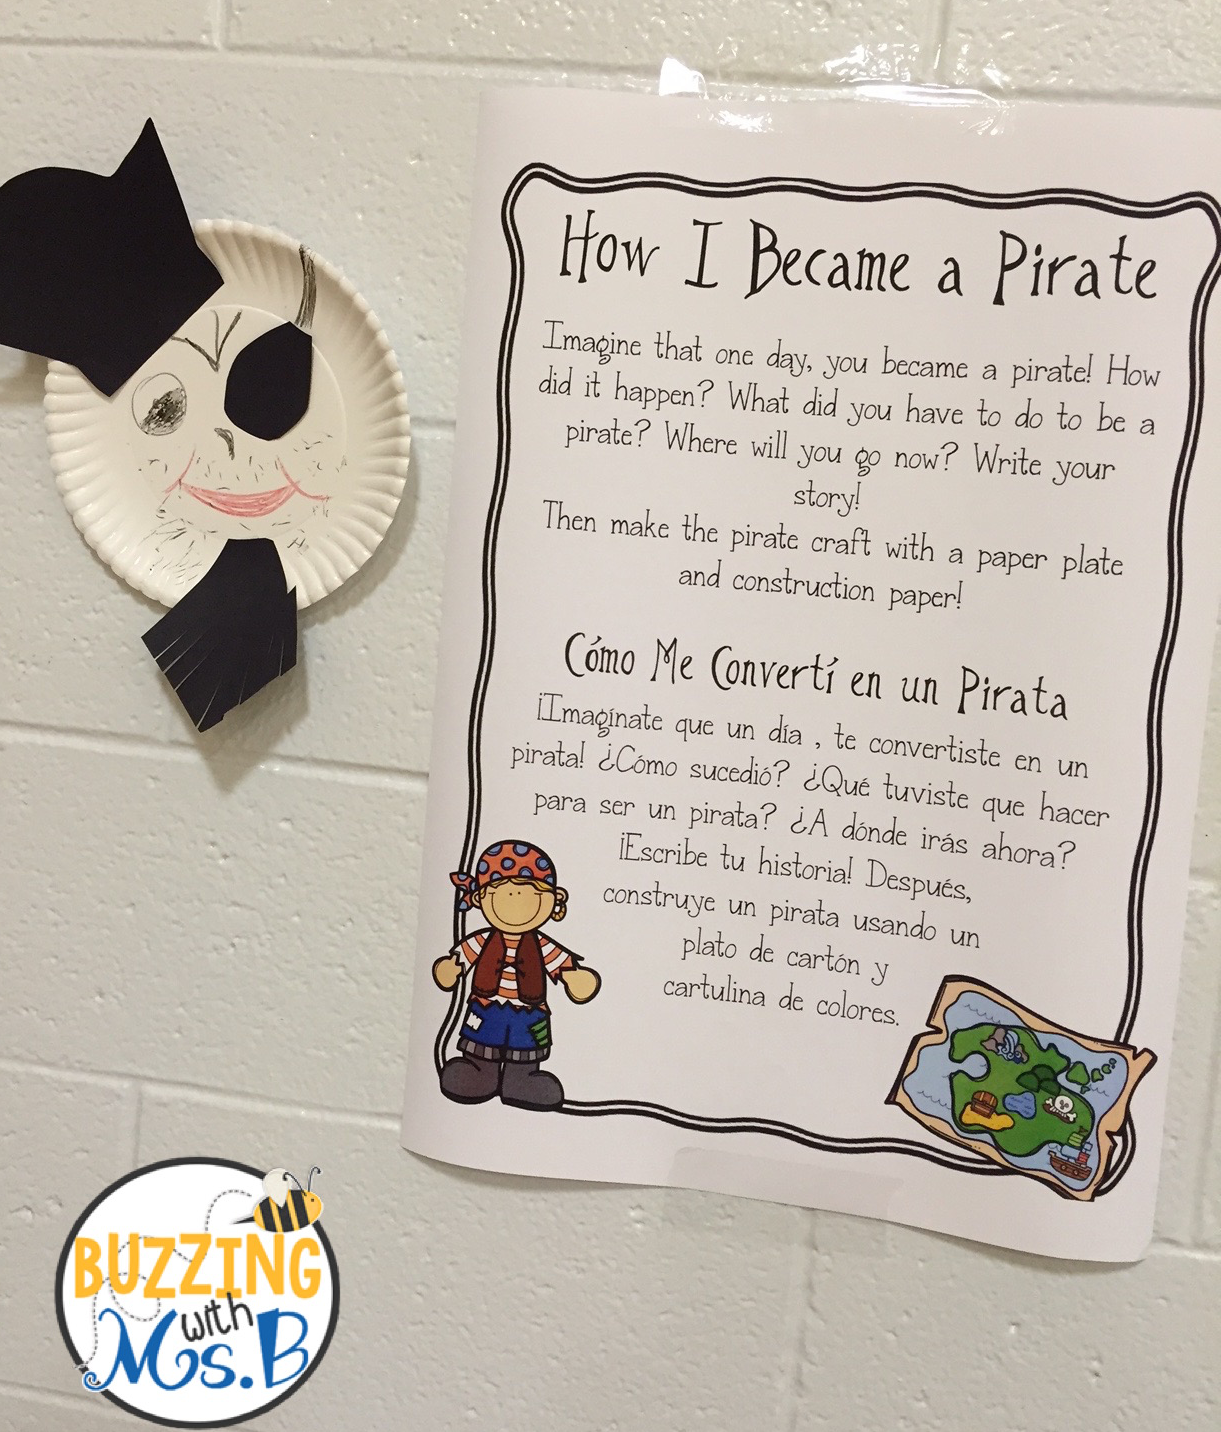 Buzzing with Ms. B: Pirate Family Literacy Night